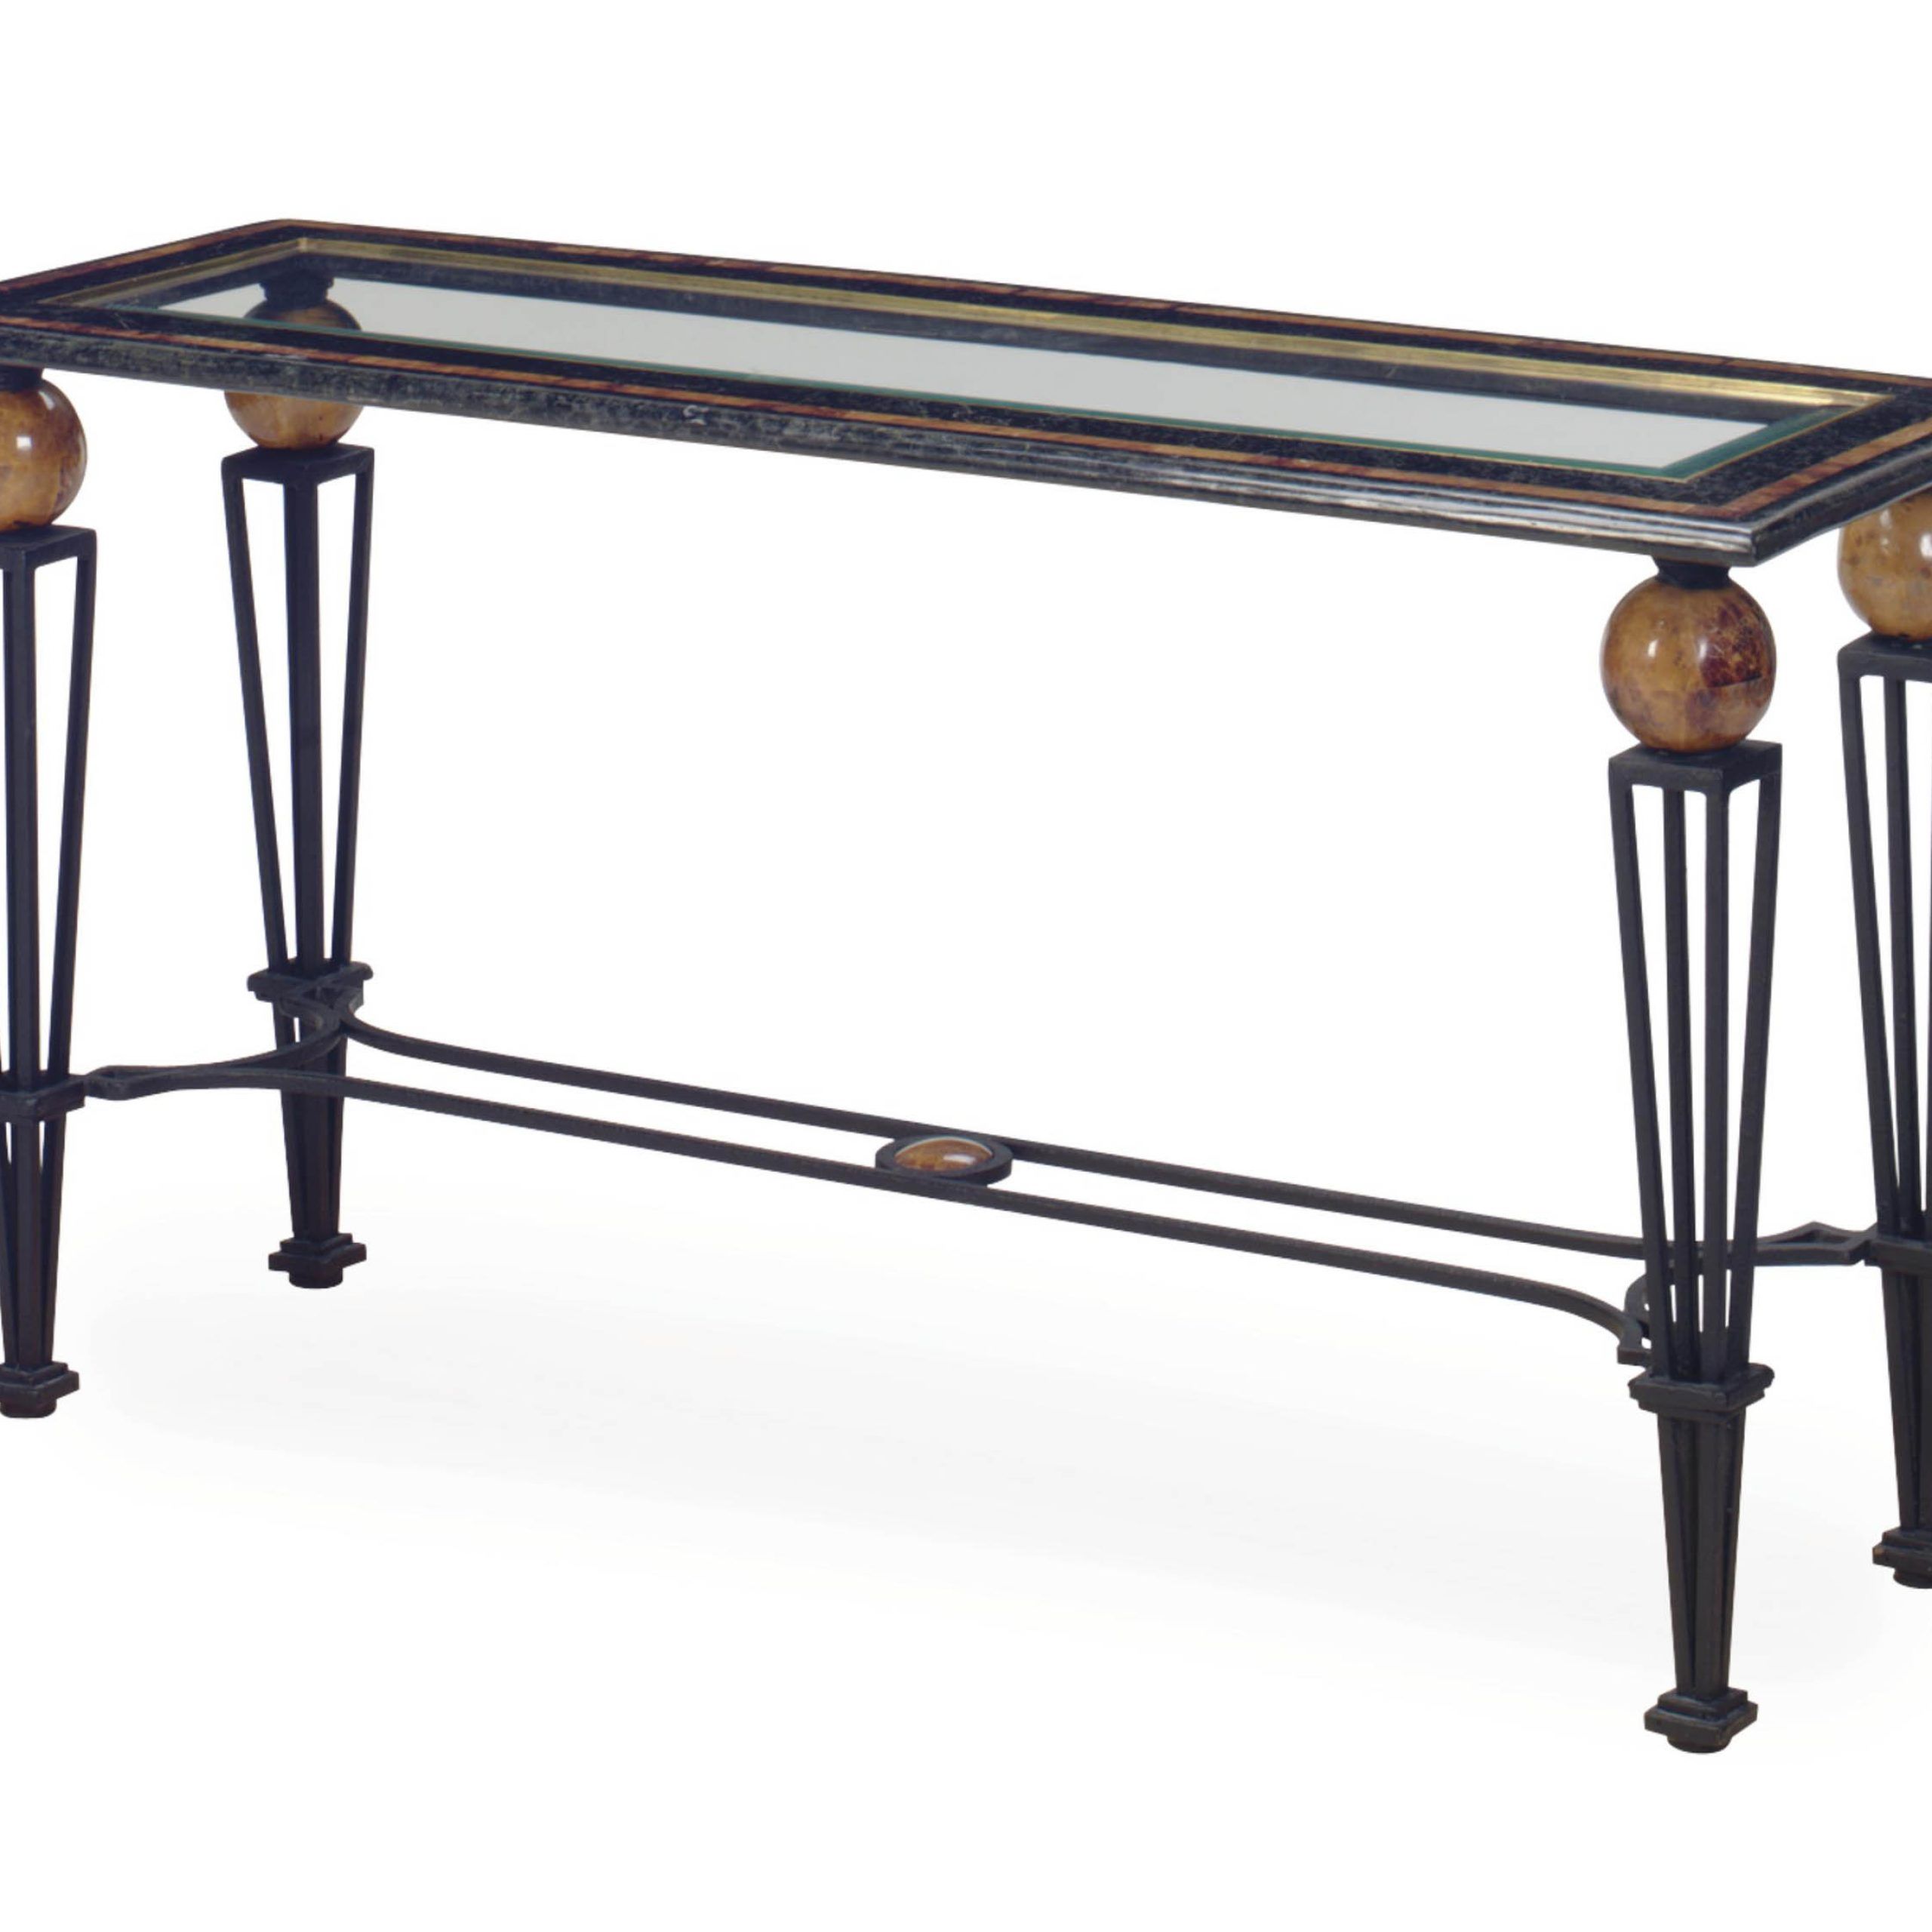 A Contemporary Faux Marble And Wrought Iron Console Table With Regard To Wrought Iron Console Tables (Photo 1 of 20)